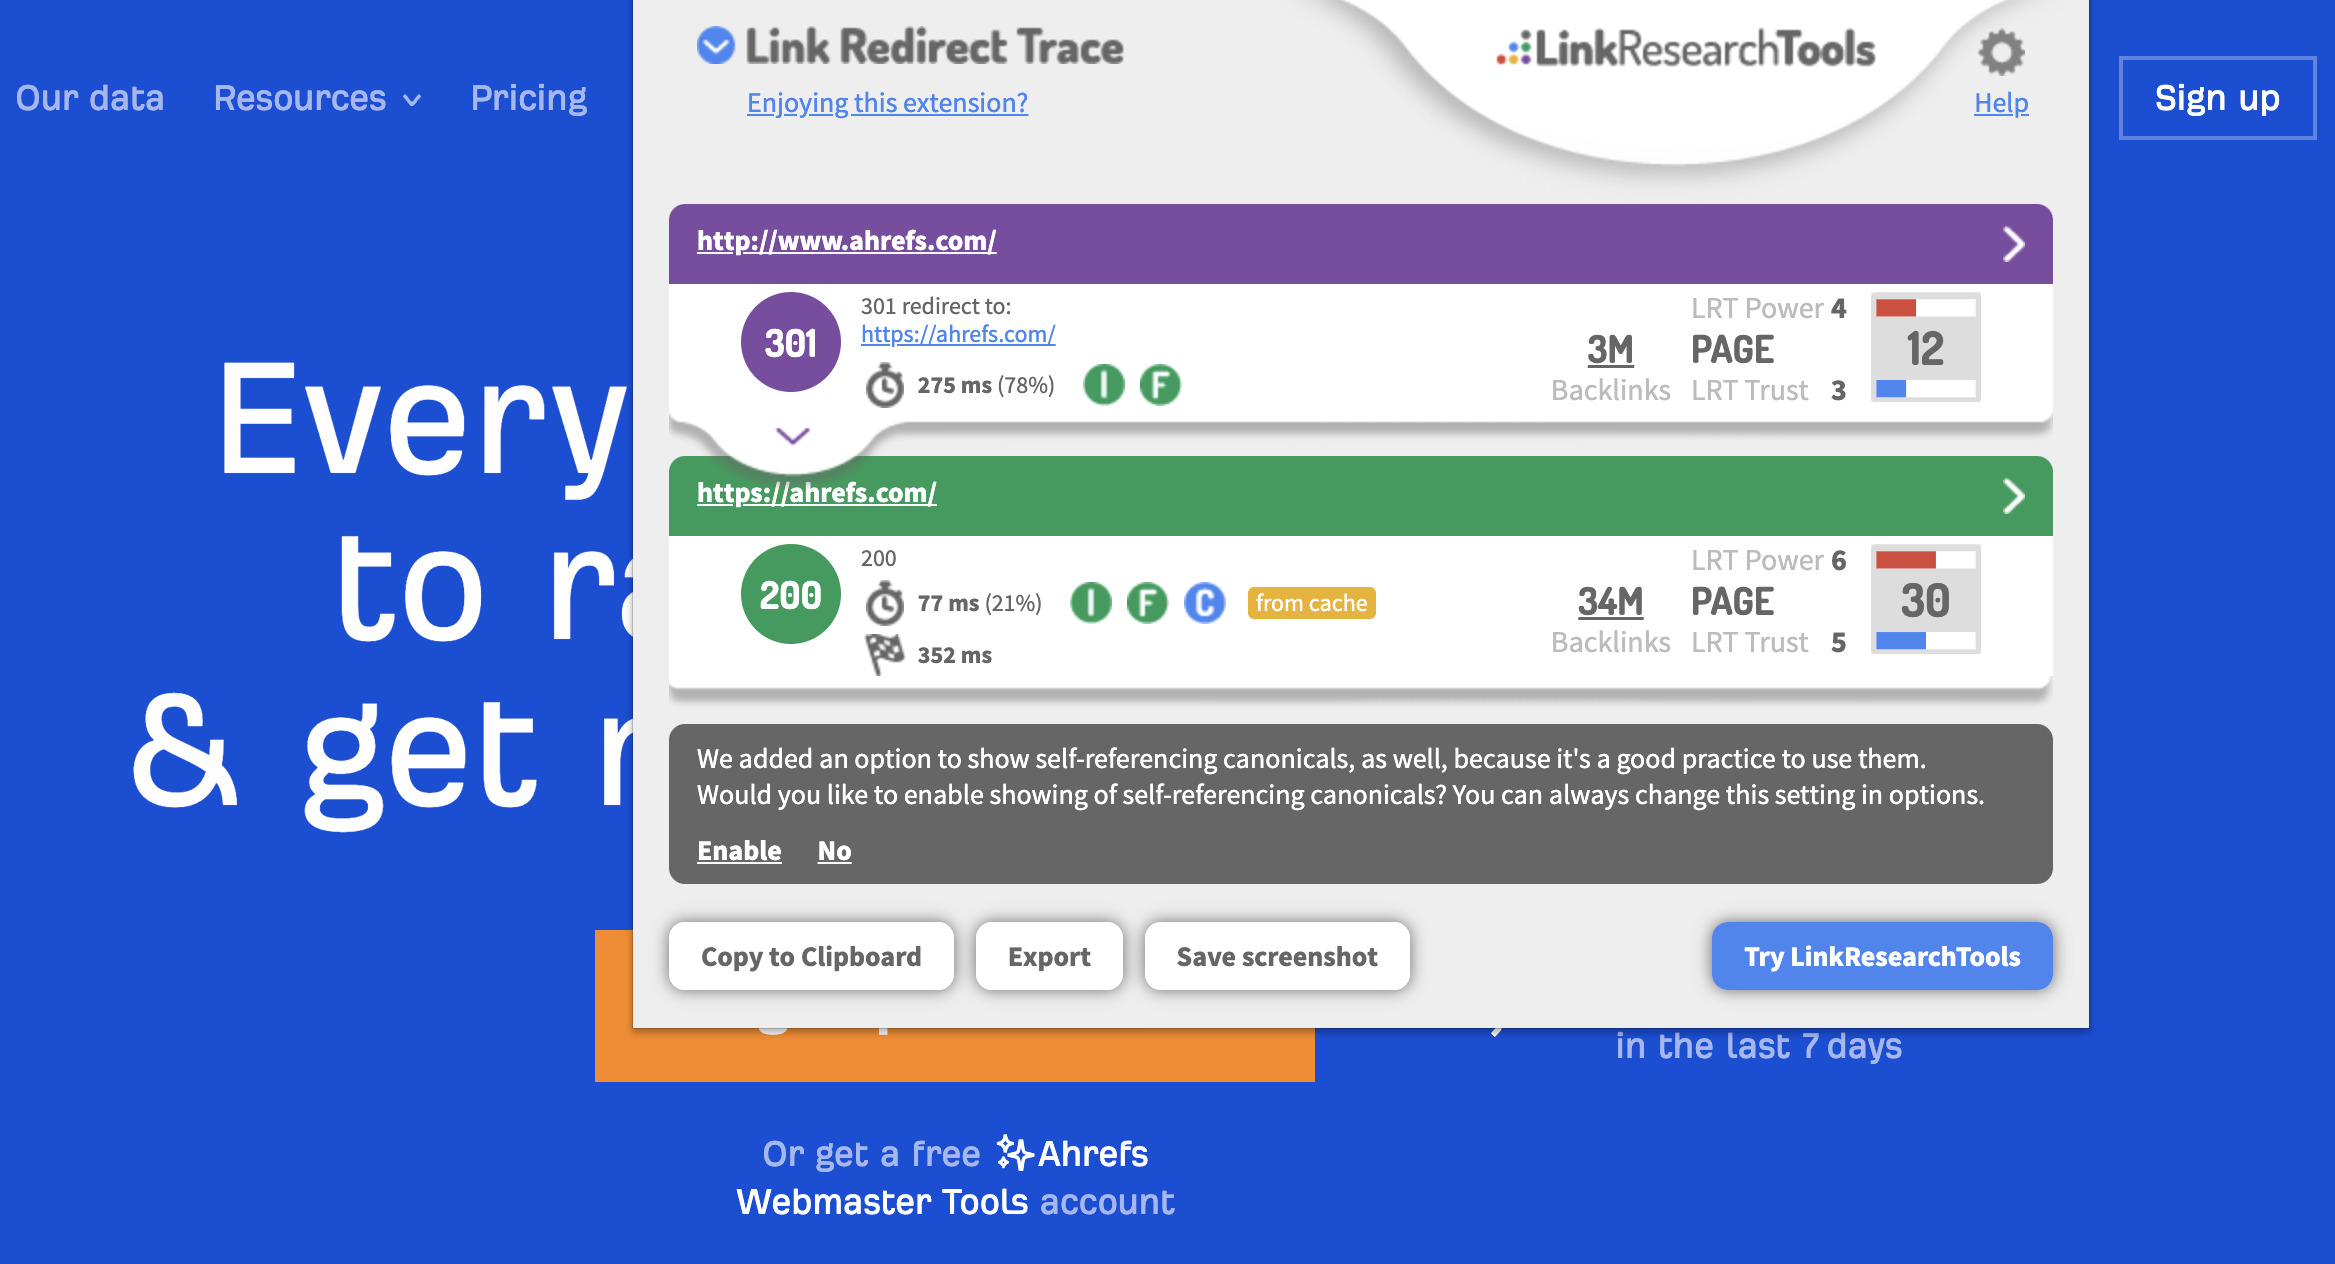 Trace link redirect